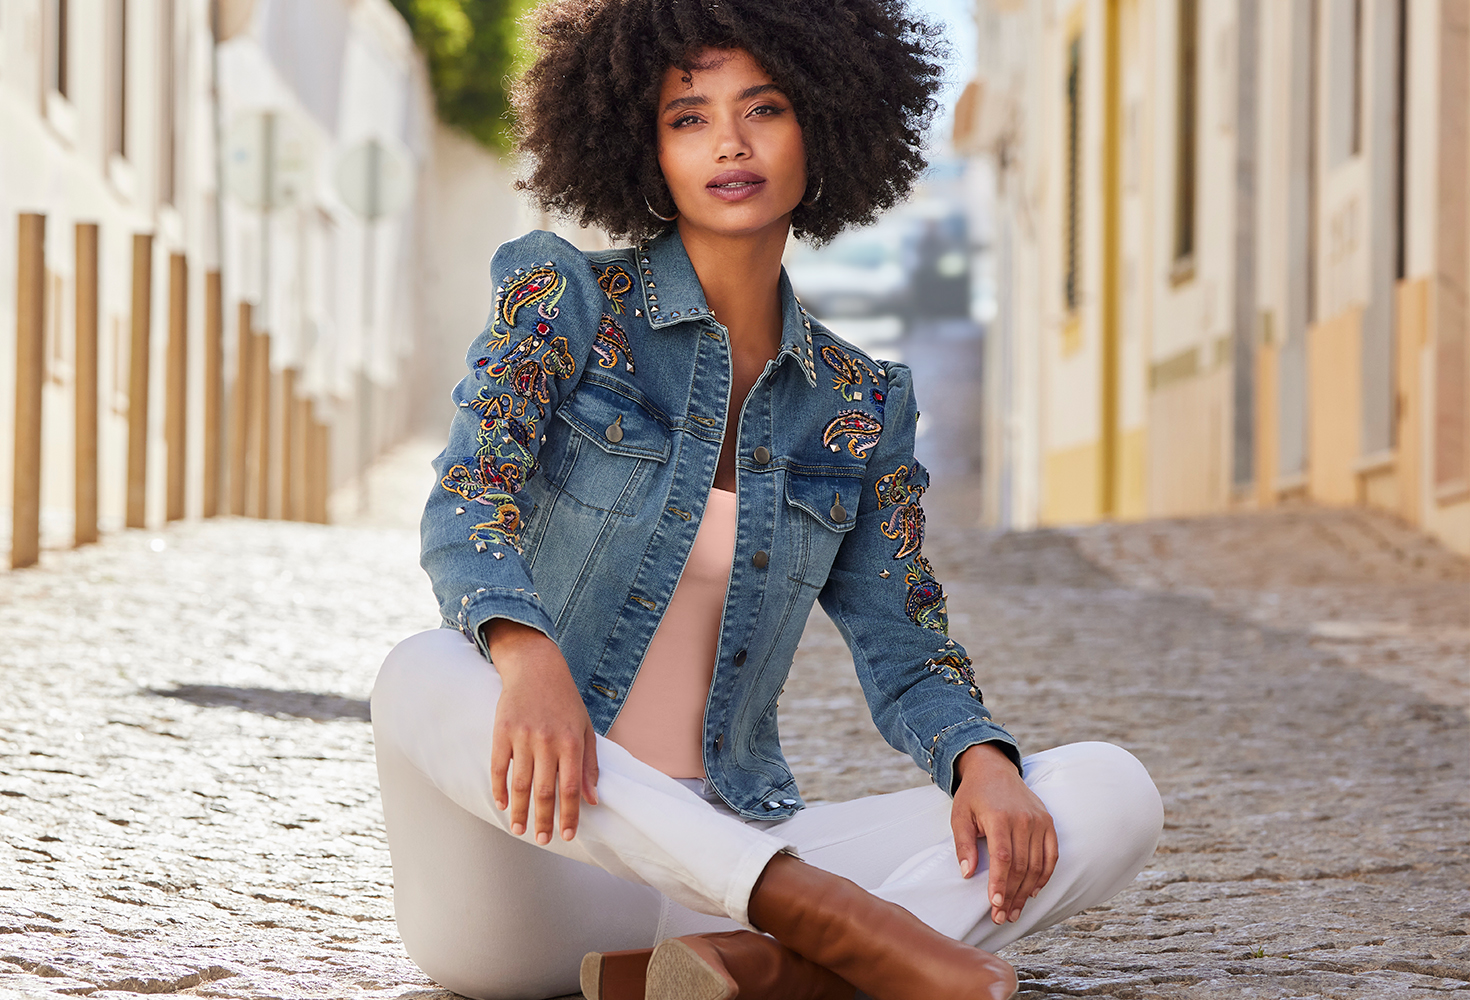 model wearing an embroidered and embellished puff-sleeve denim jacket, pink top, silver hoops, white jeans, and brown heeled leather booties.